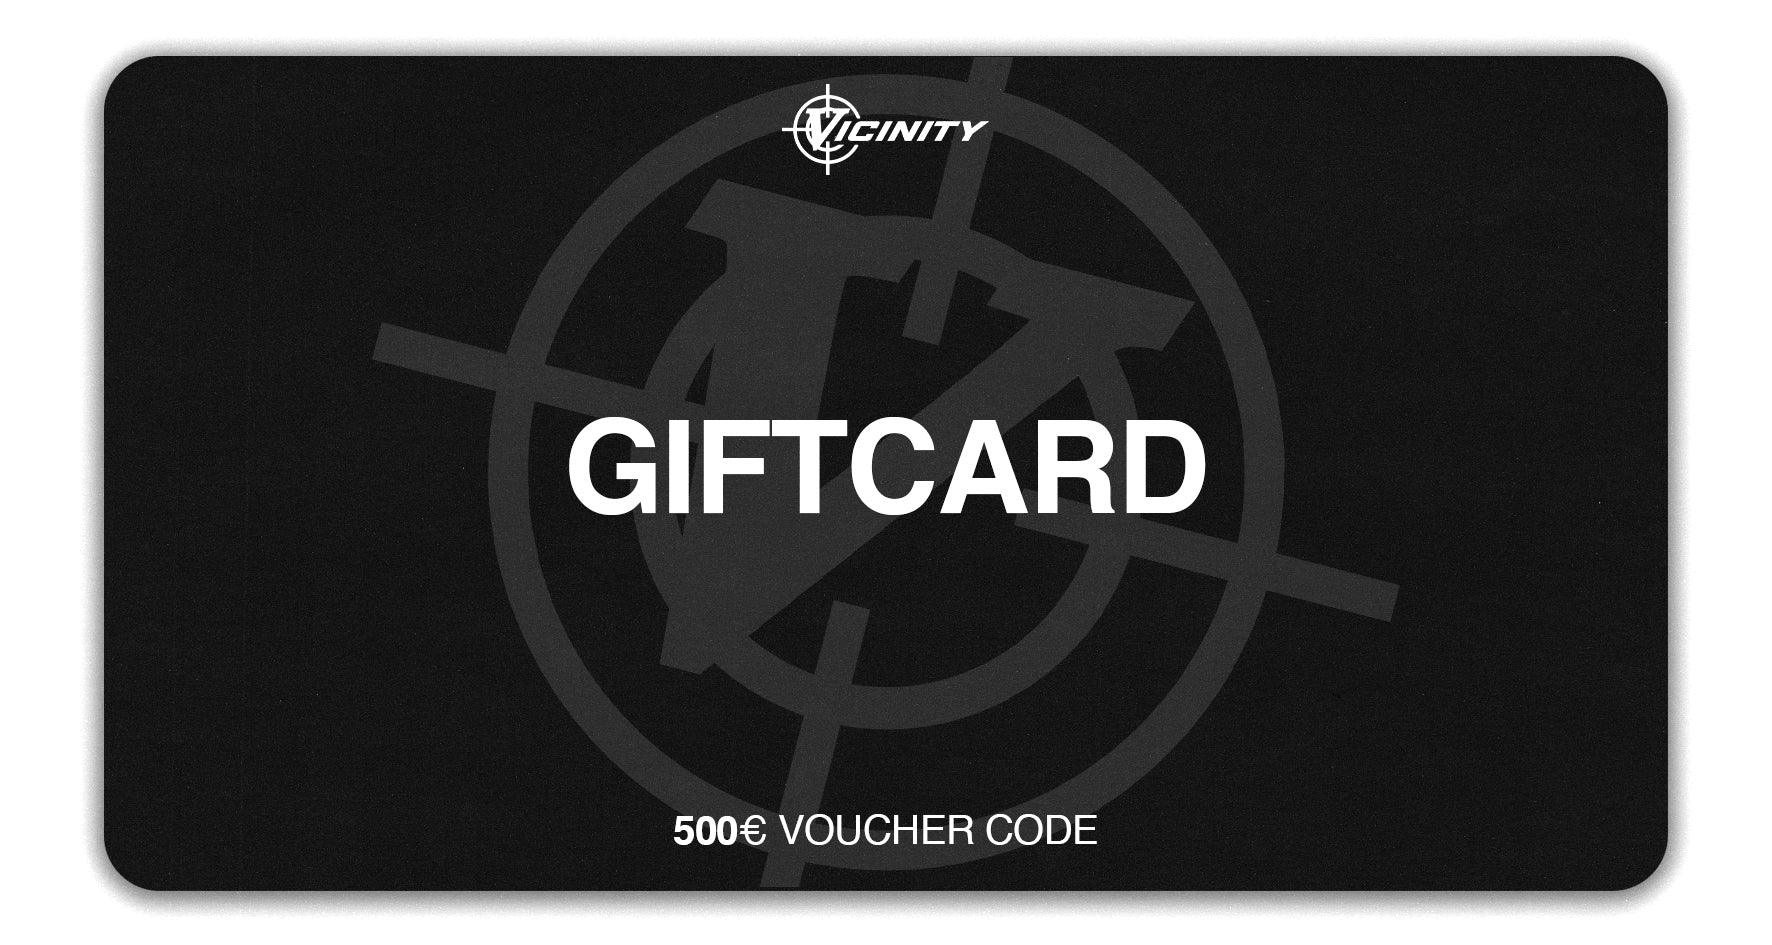 500€ GIFTCARD - VICINITY